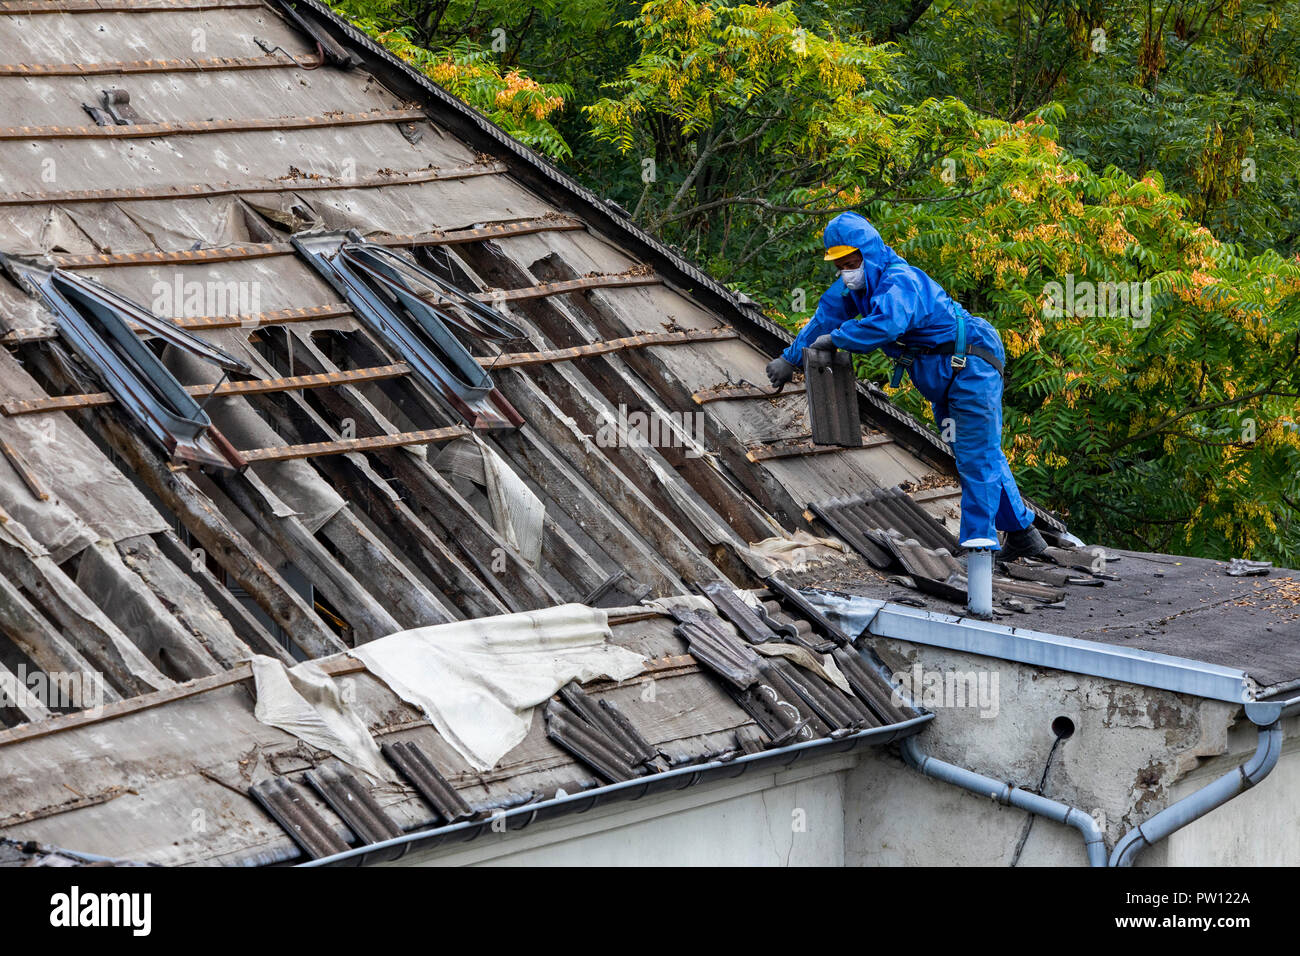 Demolition of an older dwelling house, here new rentable flats are develop, workers in the protective suit disassembled the roof, separates different  Stock Photo